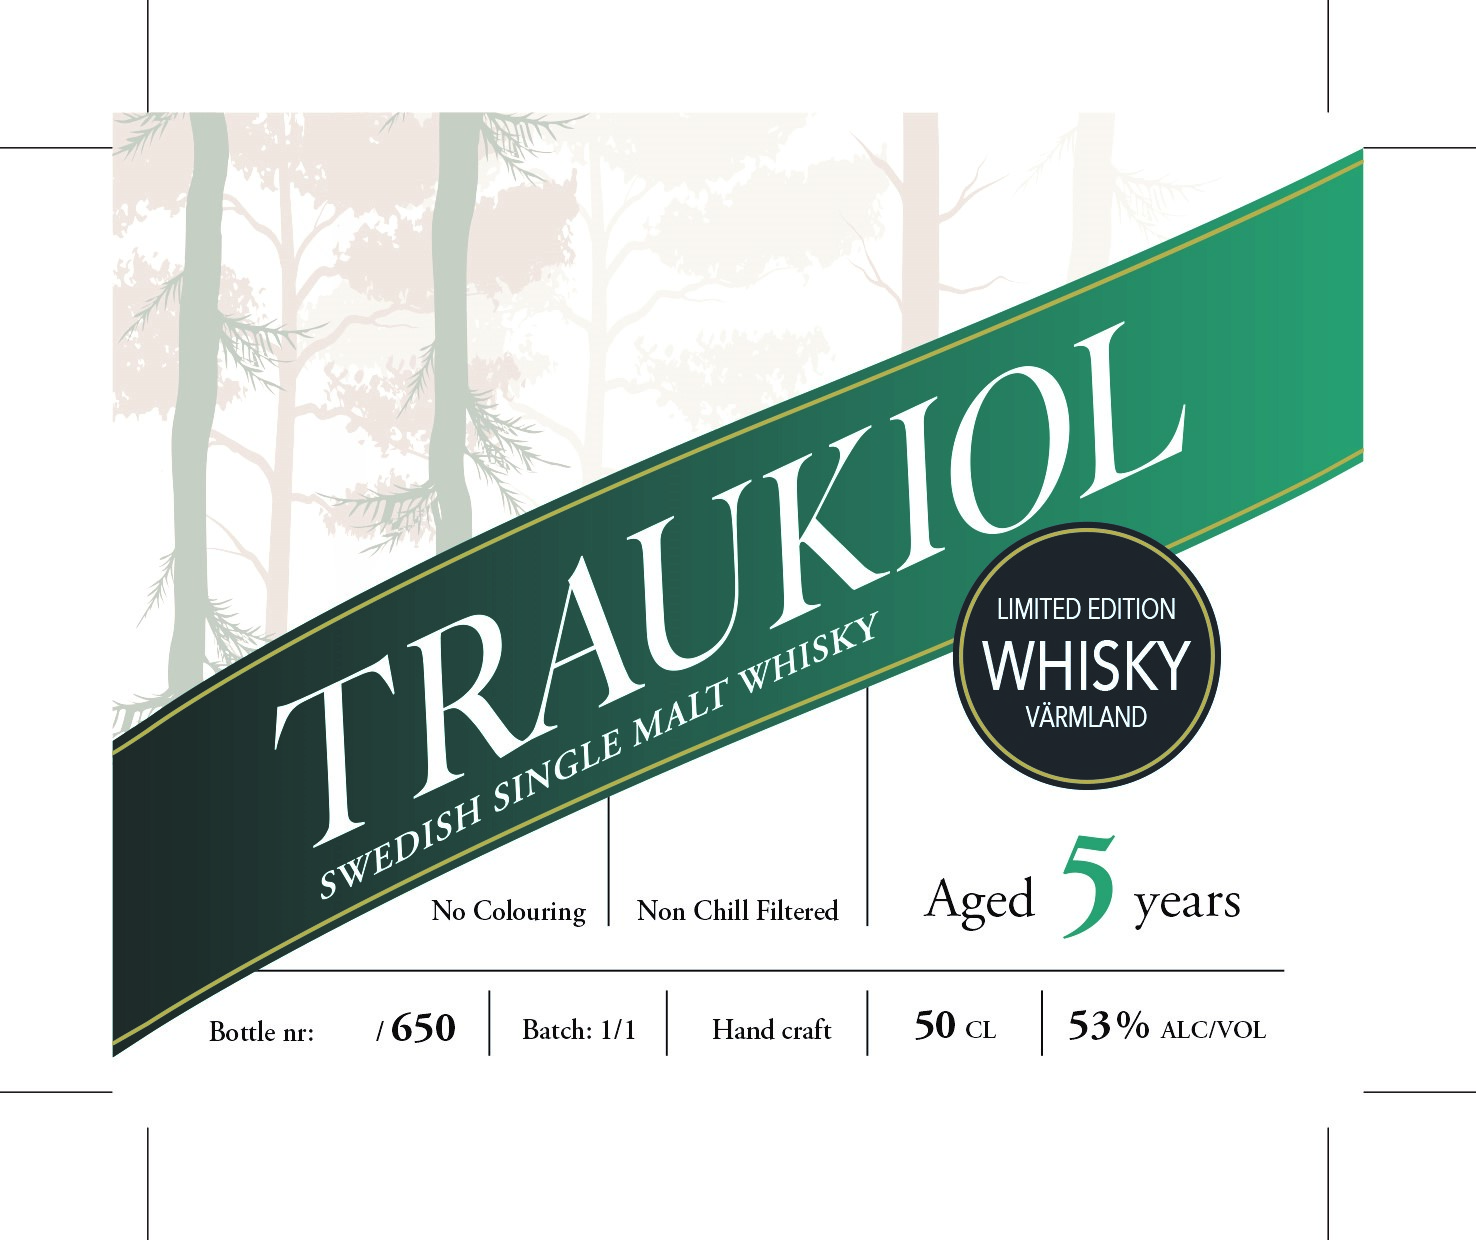 TRAUKIOL SWEDISH SINGLE MALT WHISKY LIMITED EDITION WHISKY VÄRMLAND Aged 5 years No Colouring Non Chill Filtered Bottle nr: /650 Batch: 1/1 Hand craft 50 CL 53% ALC/VOL